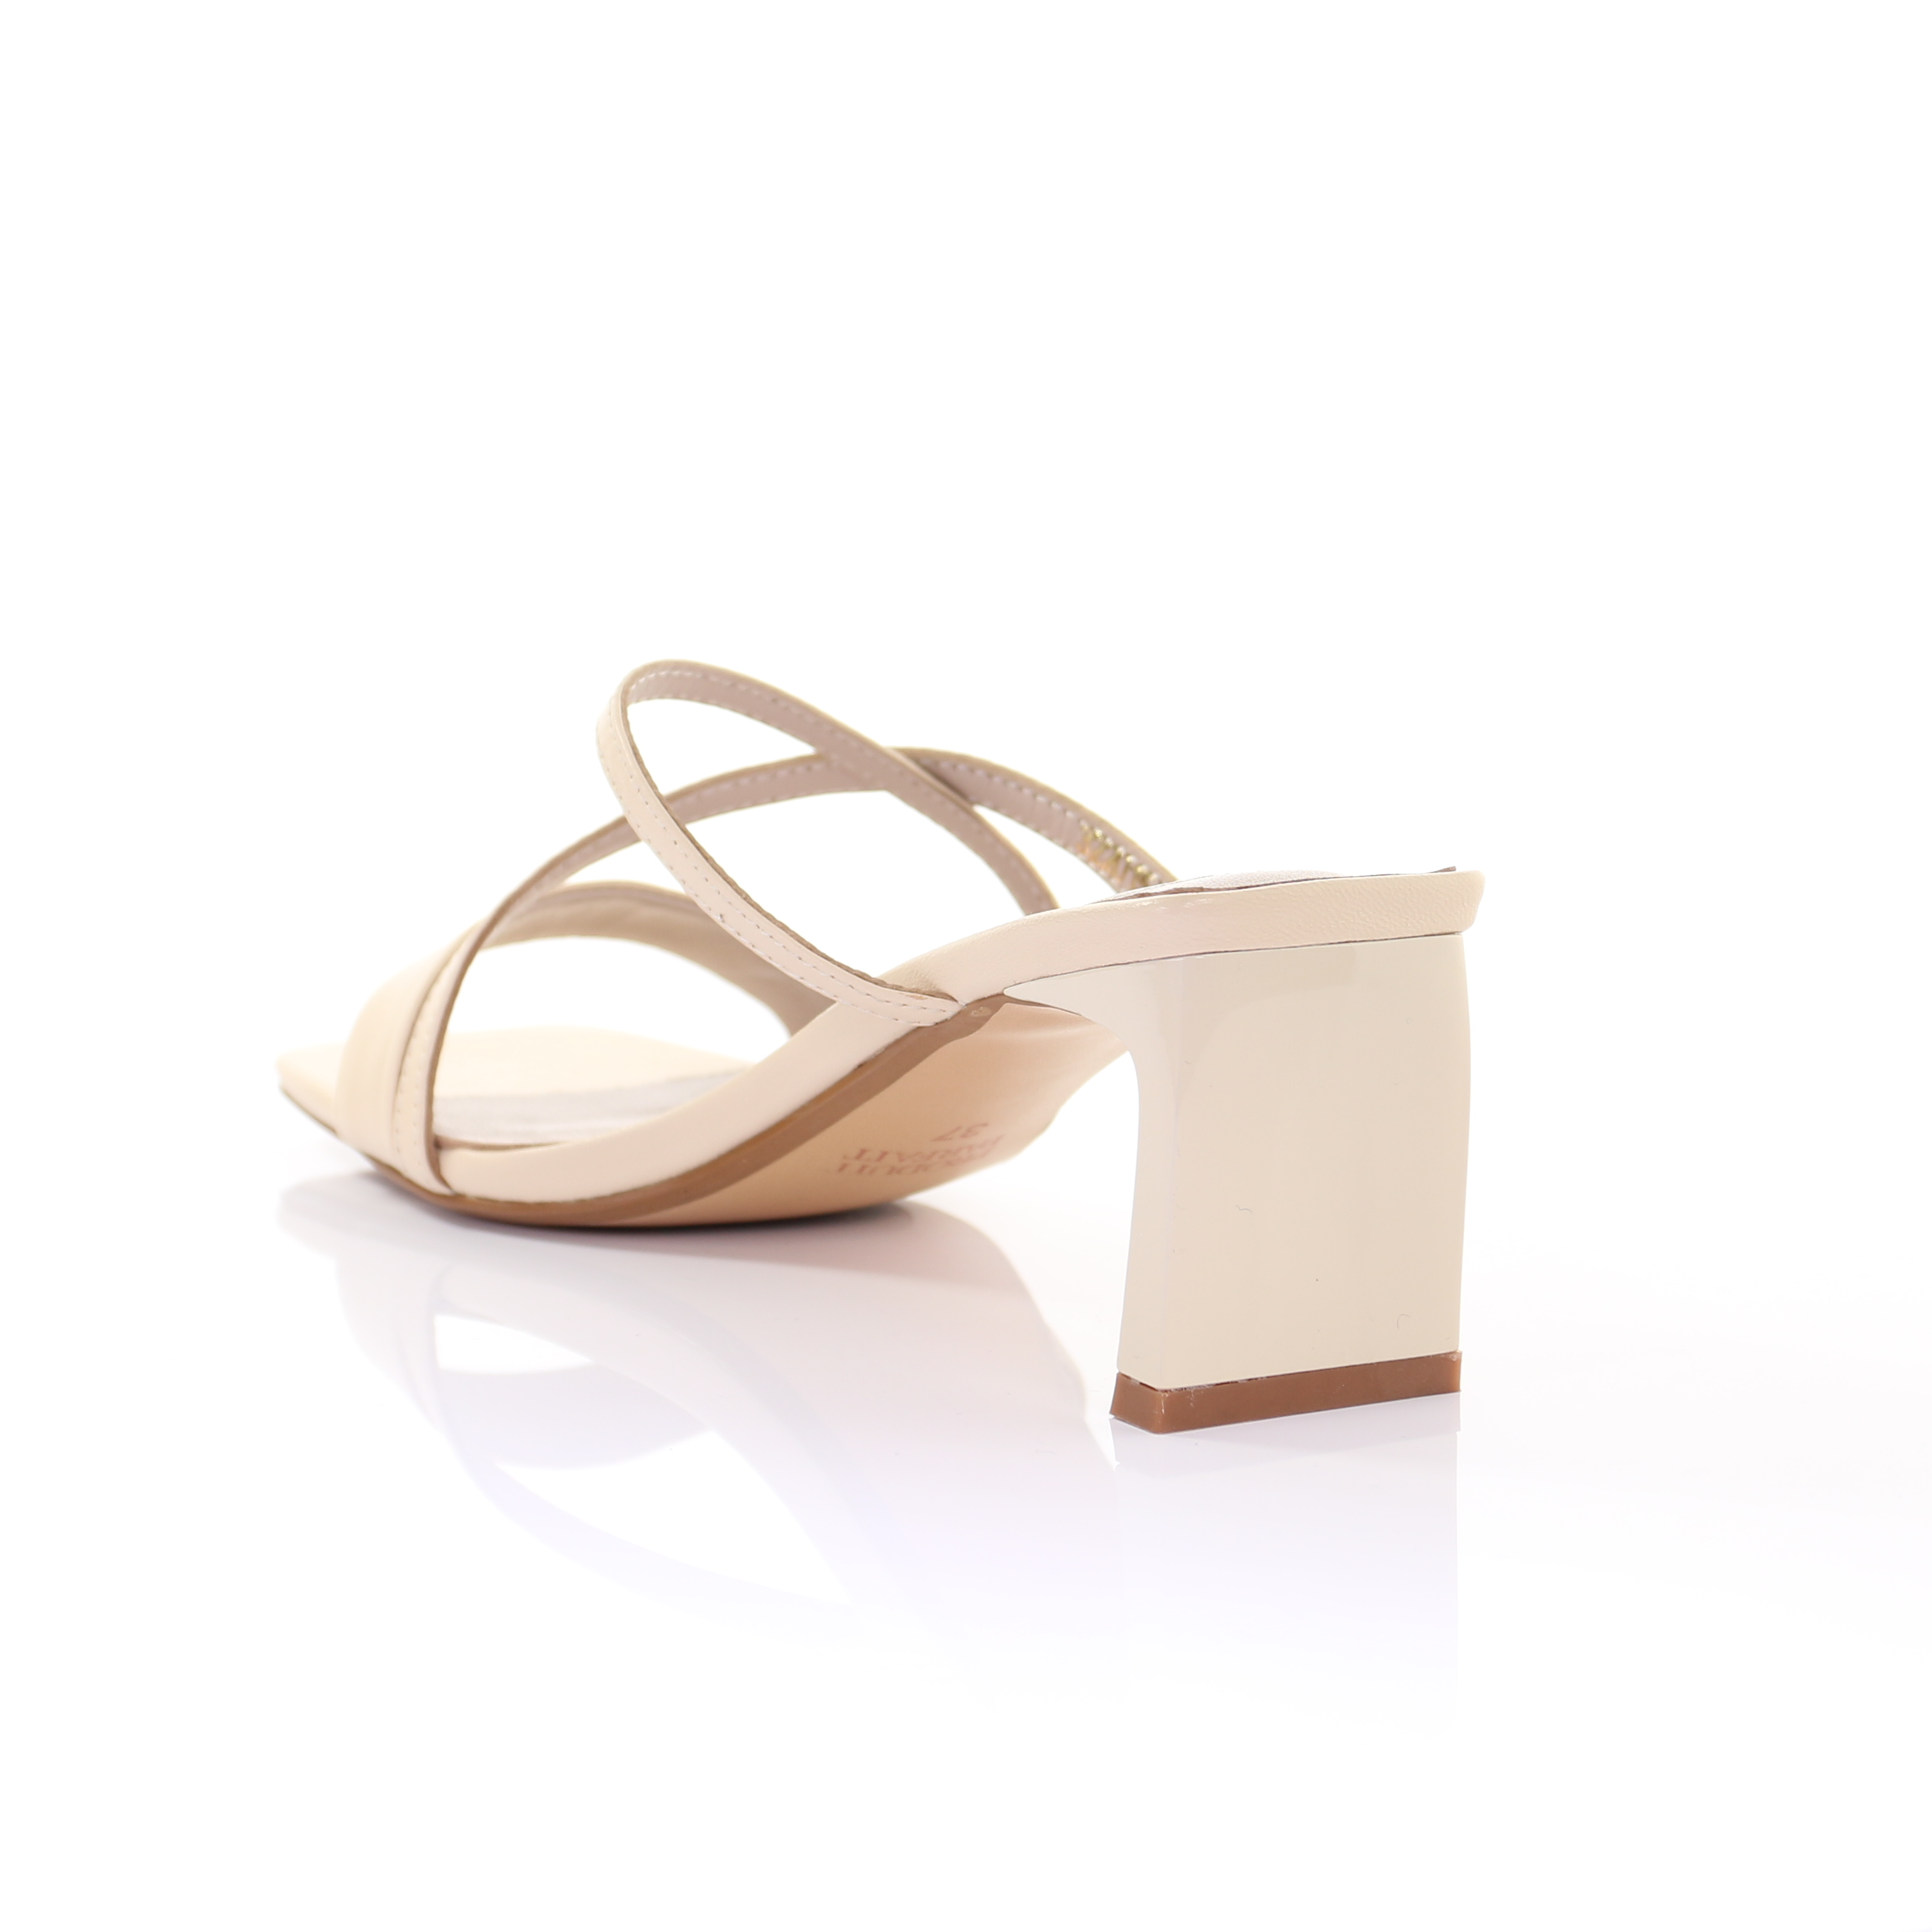 Strappy Sandals Chunky Heel in Ivory Leather | Greek Chic Handmades